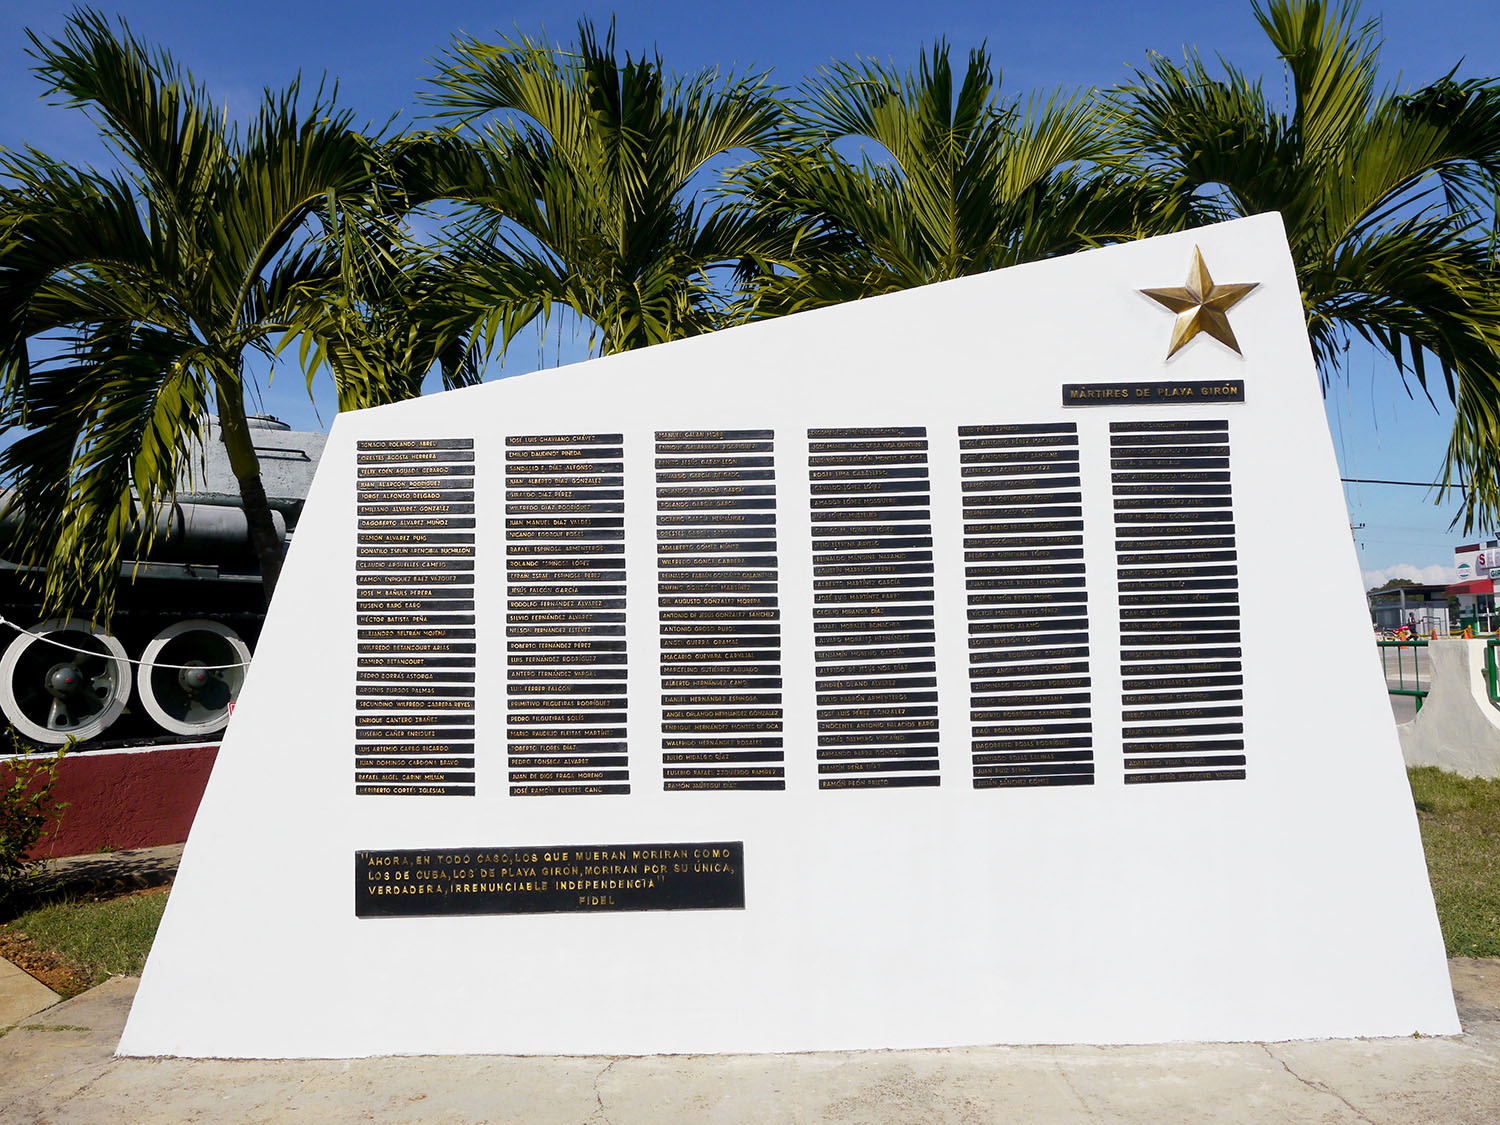 A large white memorial is covered in about 170 gold plaques with the names of Cuban soldiers who died in the Bay of Pigs invasion.